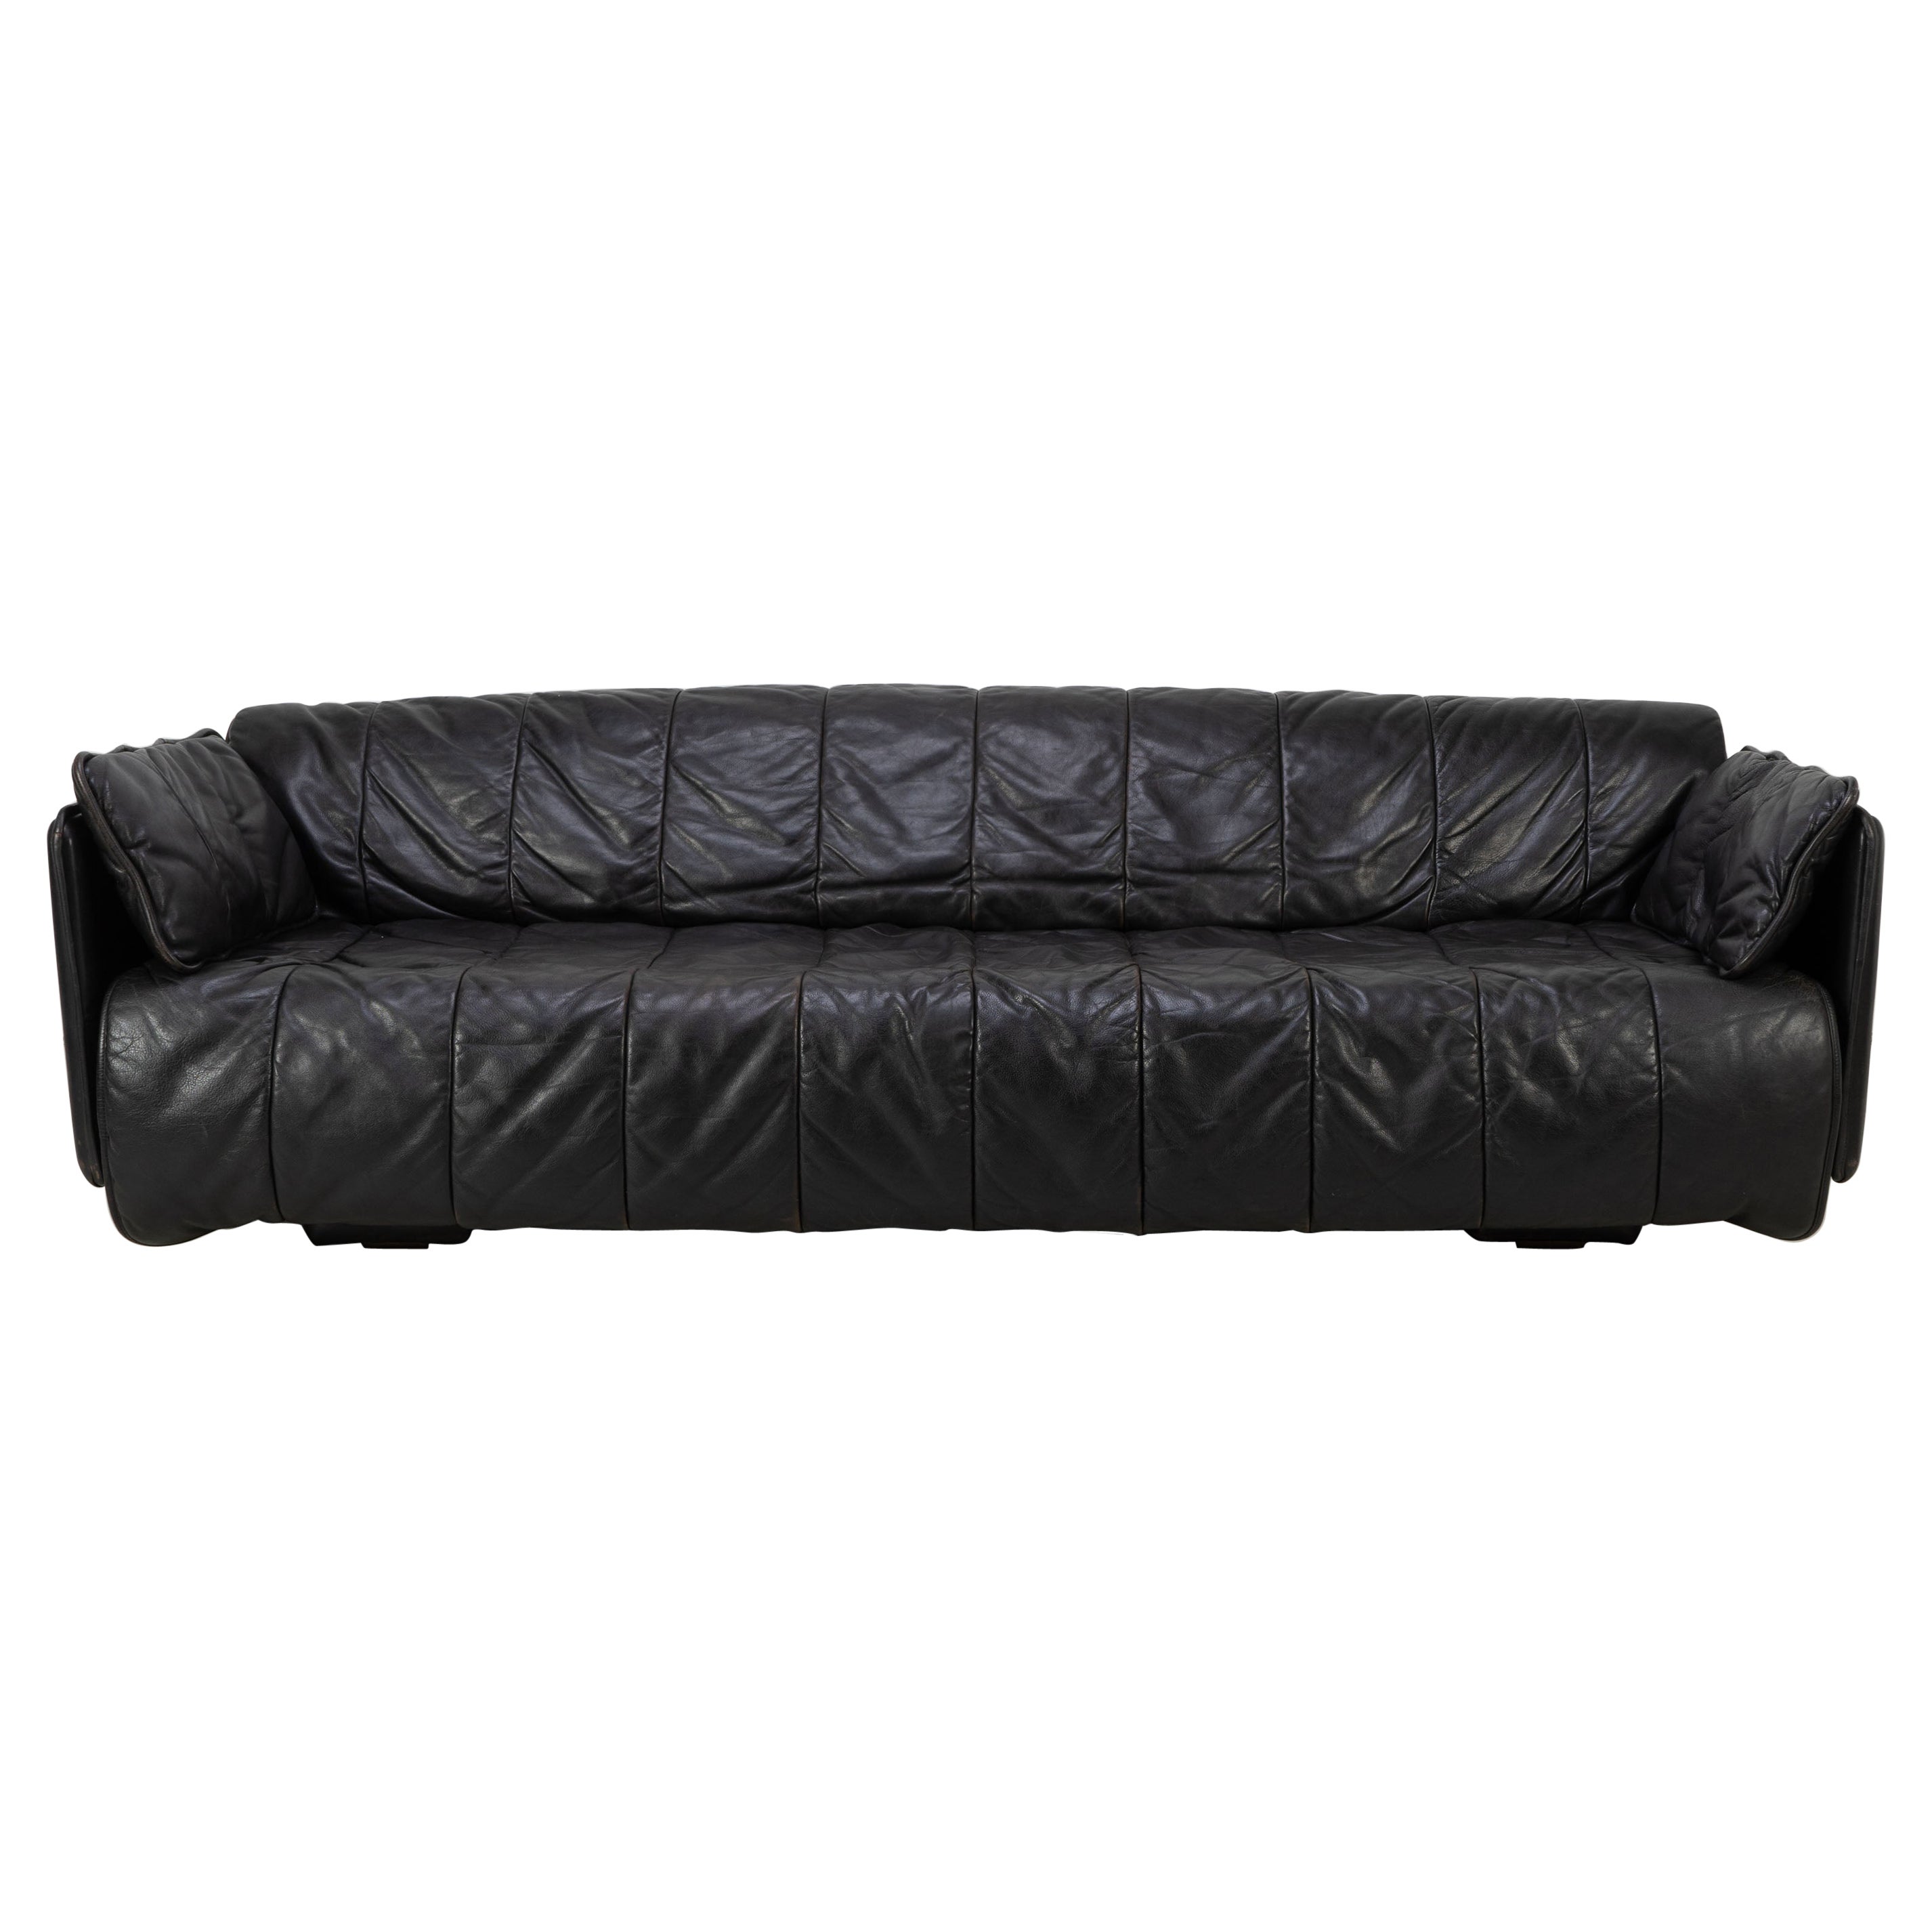 1970s Sofa De Sede DS-69 Switzerland Black Leather Daybed For Sale